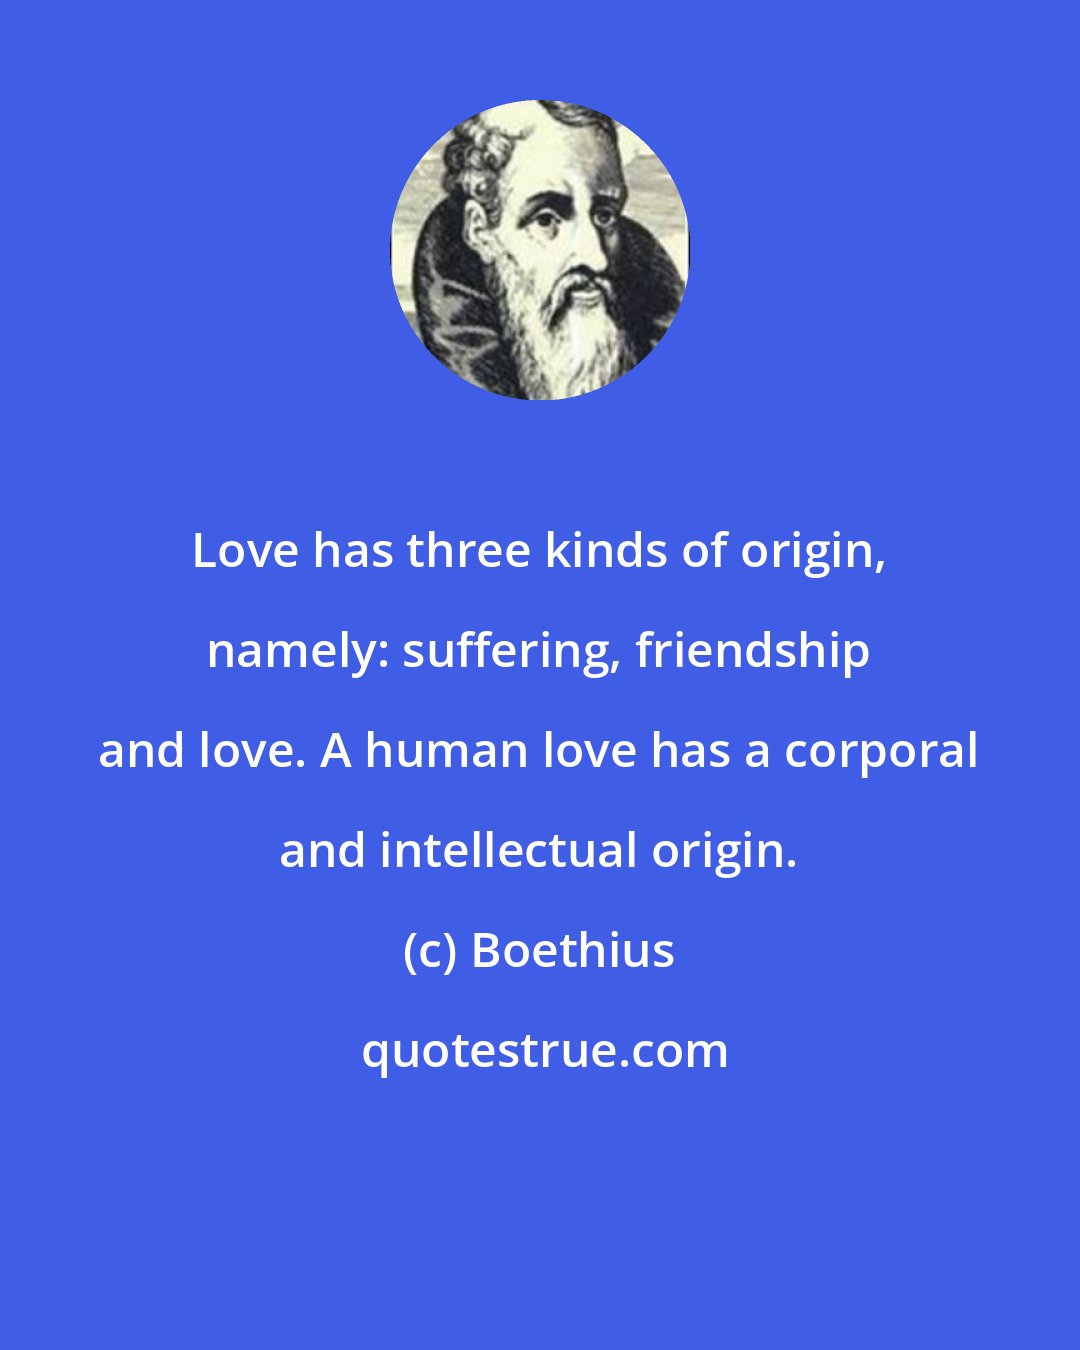 Boethius: Love has three kinds of origin, namely: suffering, friendship and love. A human love has a corporal and intellectual origin.